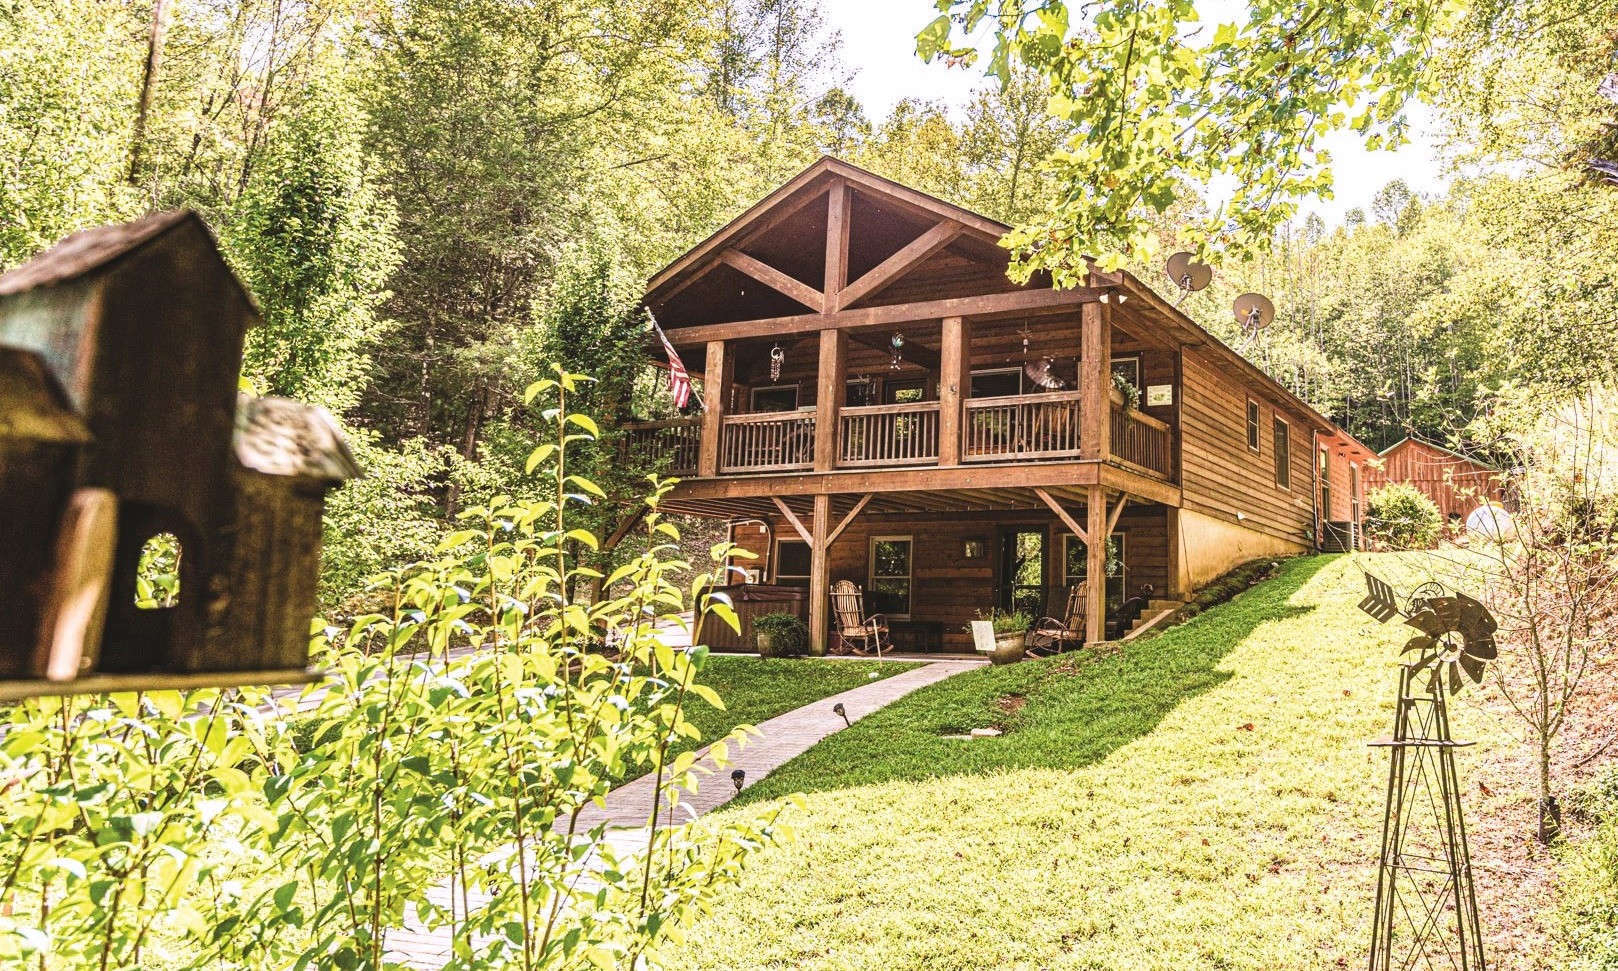 Hidden away on a private 4.85 acre setting in the North Carolina mountains, this 2-bedroom, plus loft, 3-bath cabin offers a truly private mountain retreat complete with pond, natural mountain springs, bunkhouse, barn/workshop, lots of wildlife and fresh mountain air.